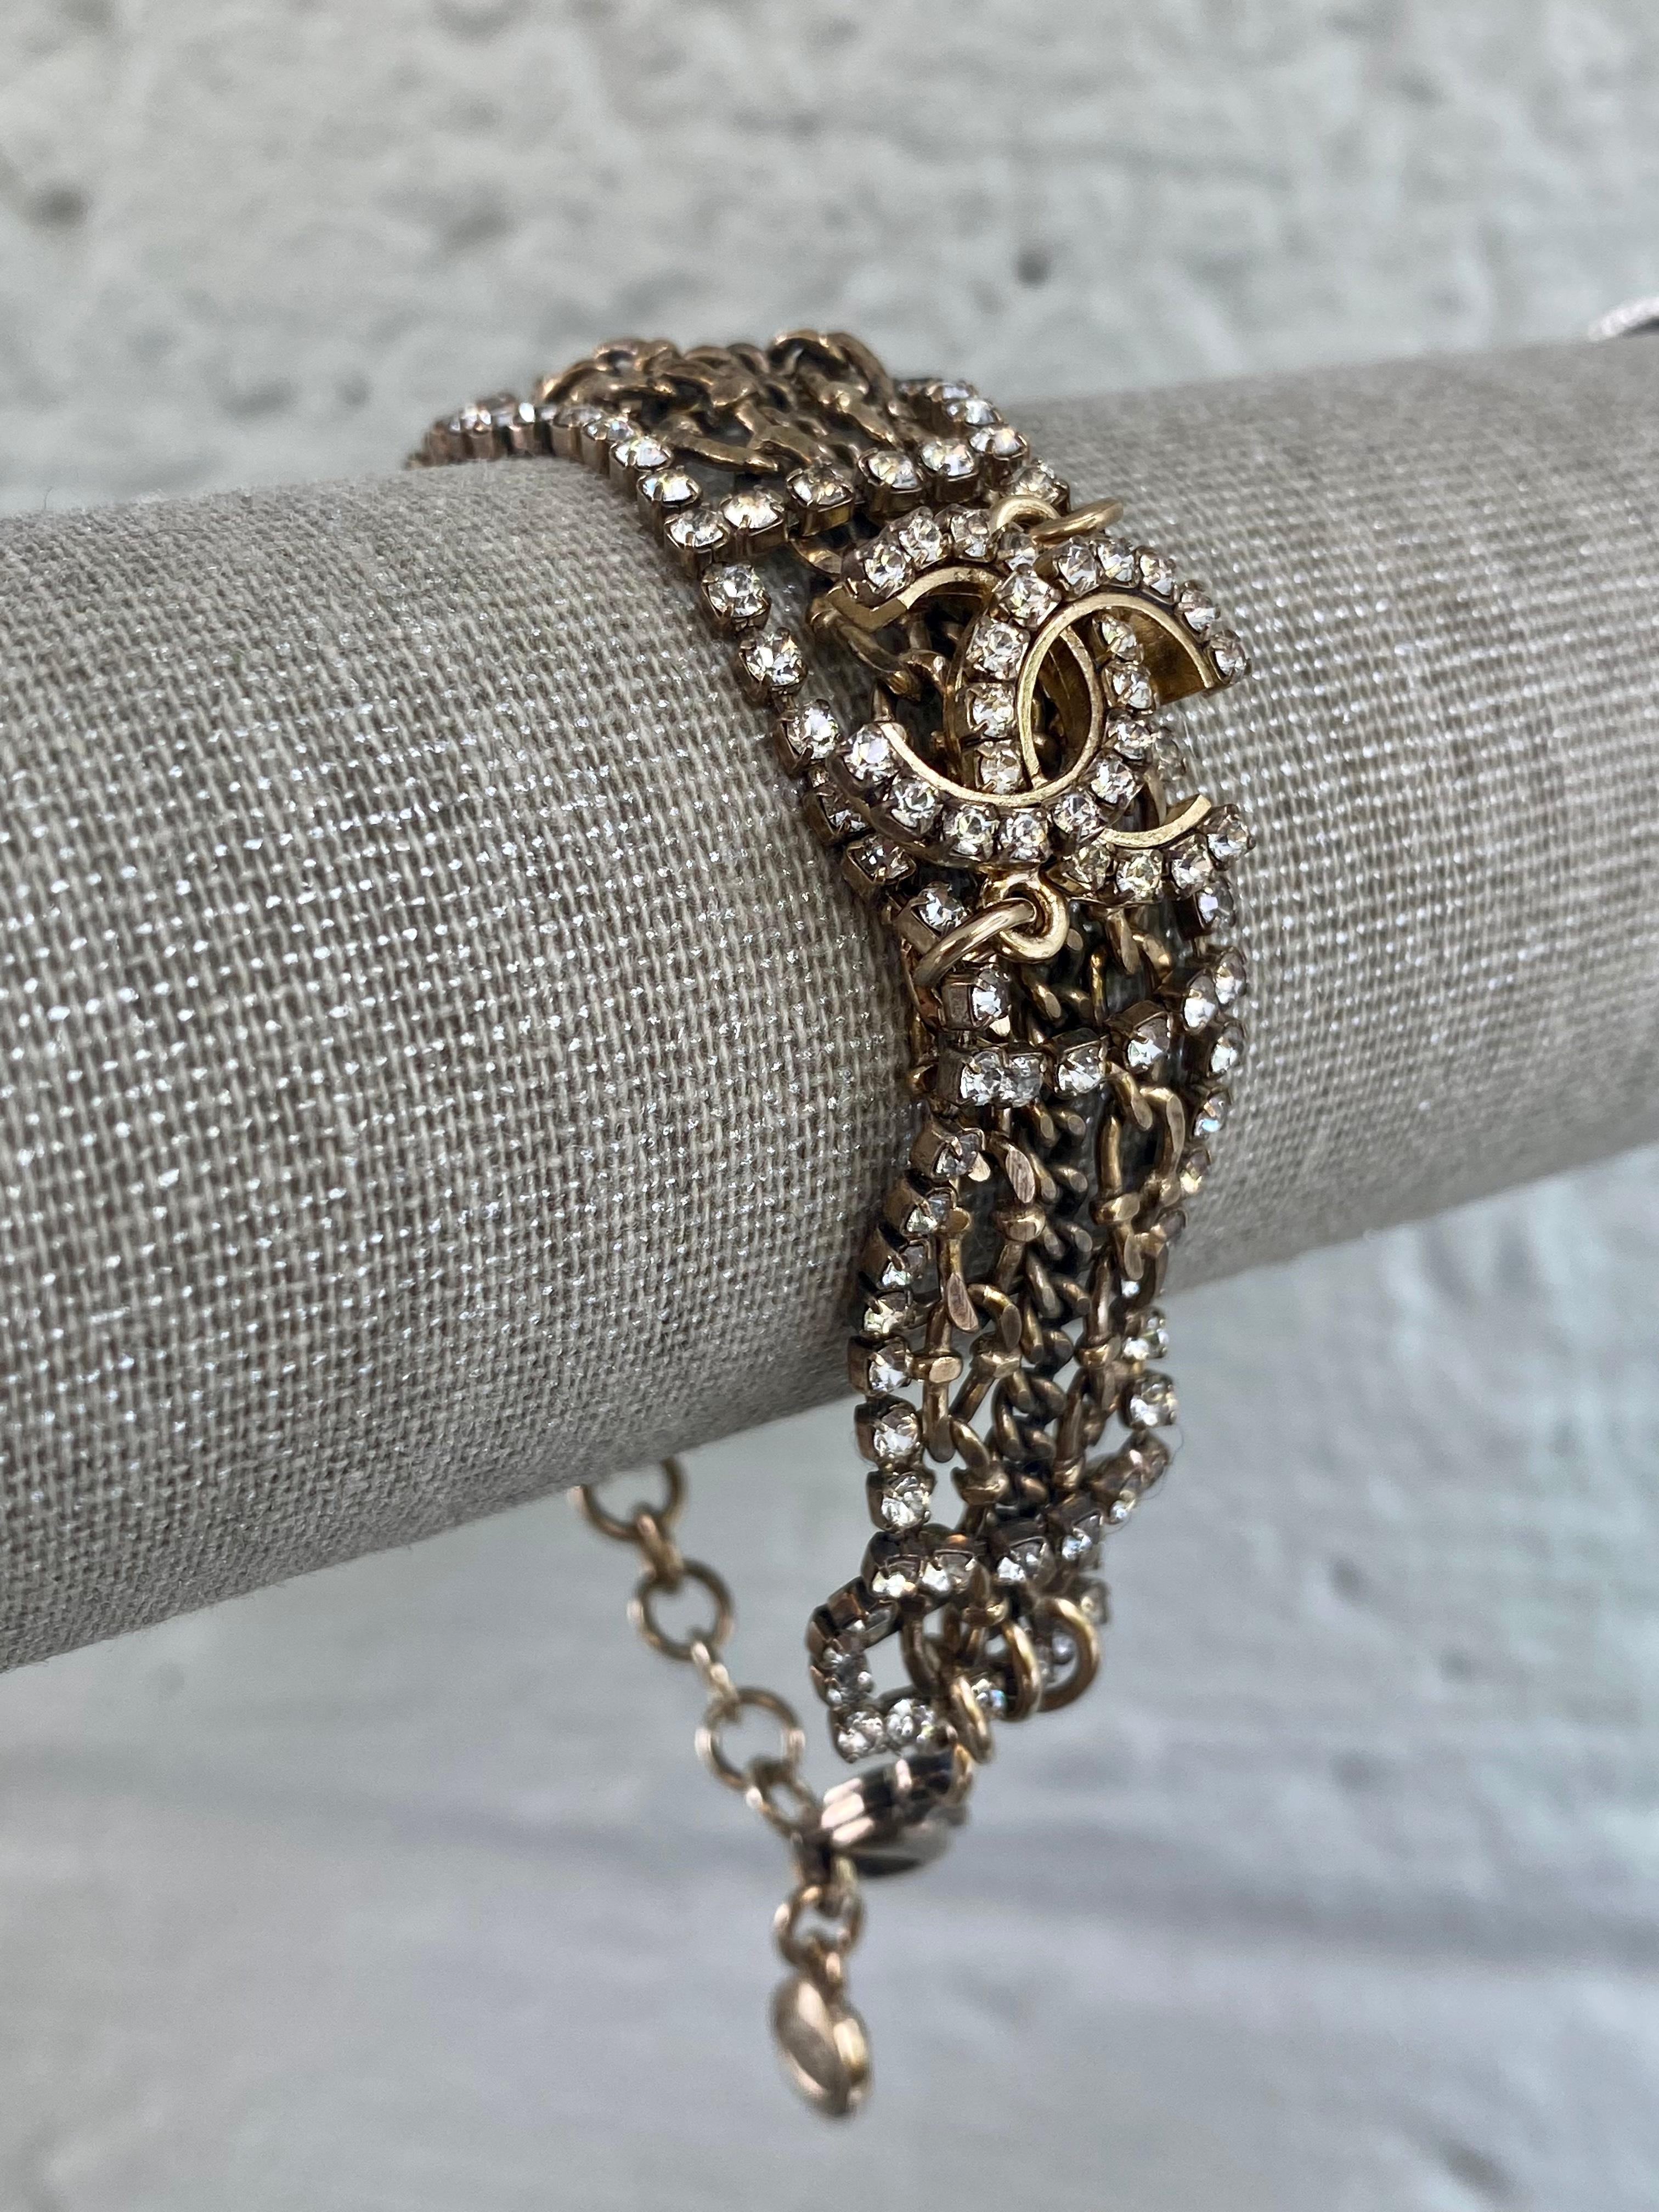 Uncut Chanel Strass Crystals Chain Links Bracelet 